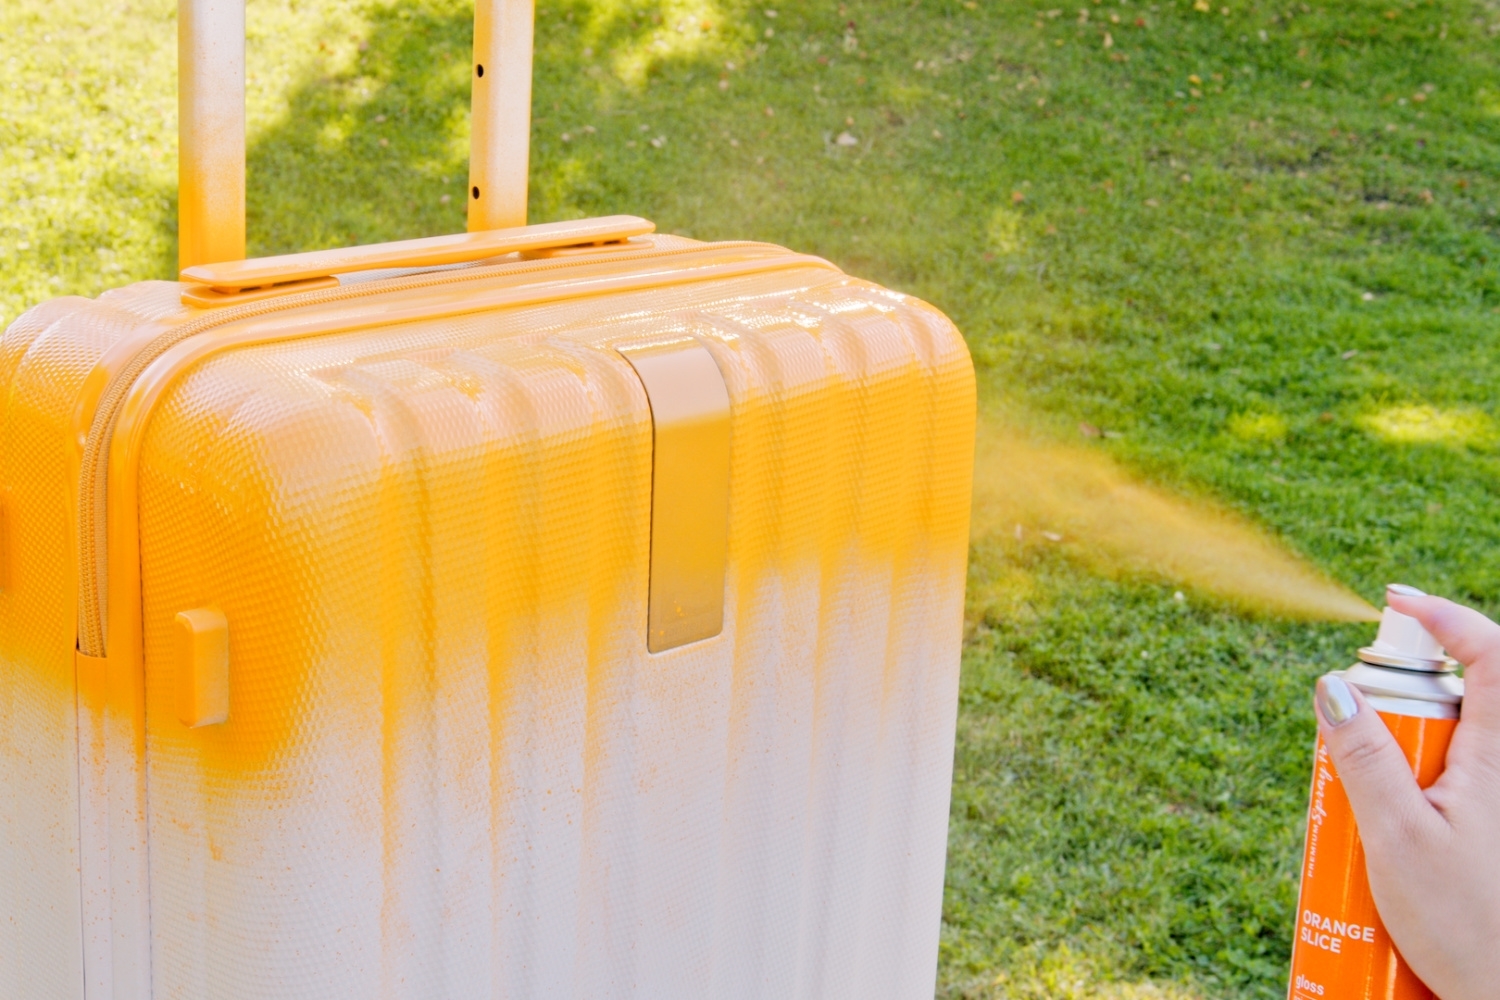 Apply spray paint to the suitcase